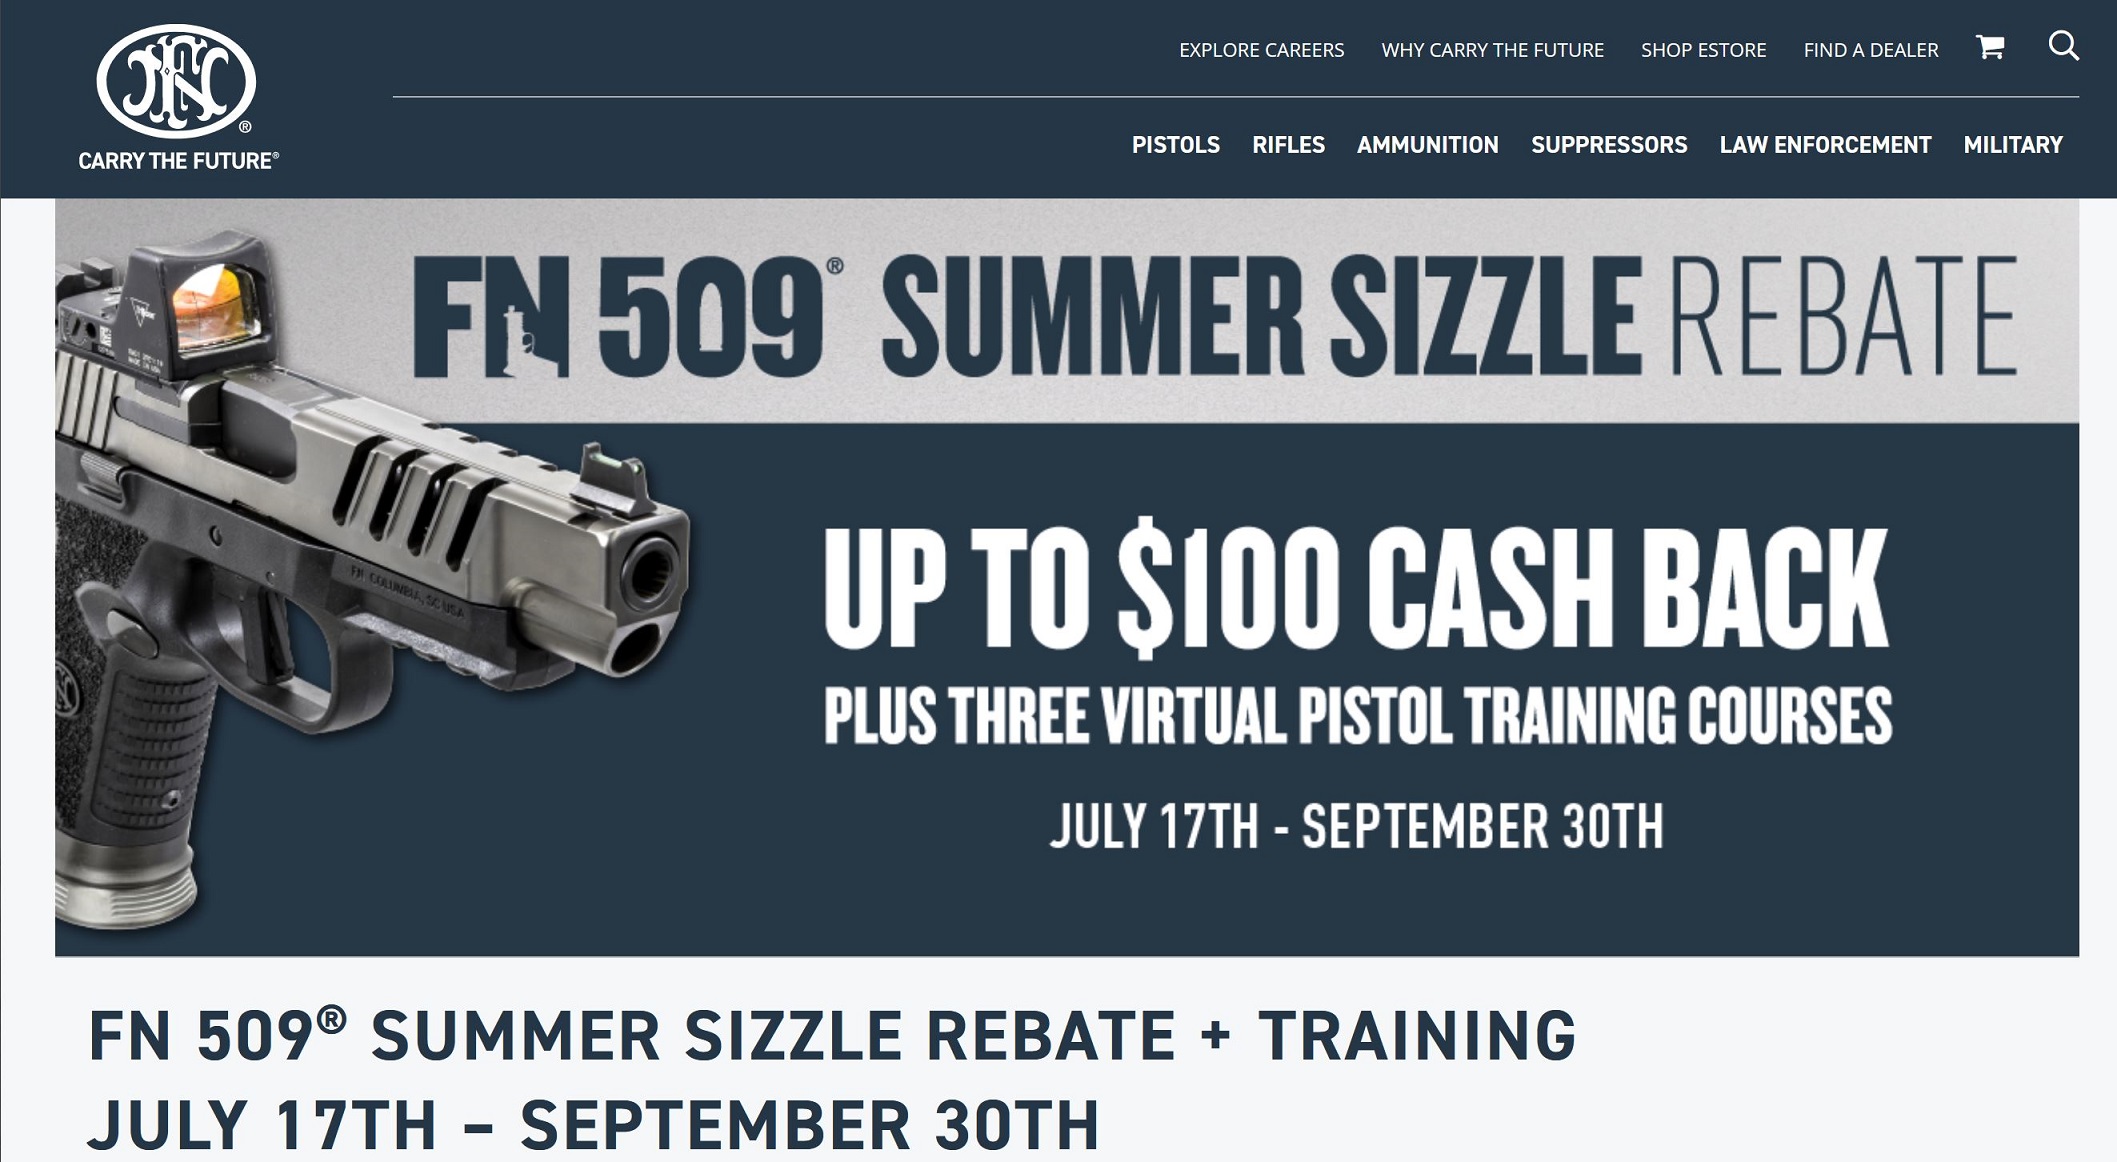 https://fnamerica.com/promotions/2023-summer-sizzle/